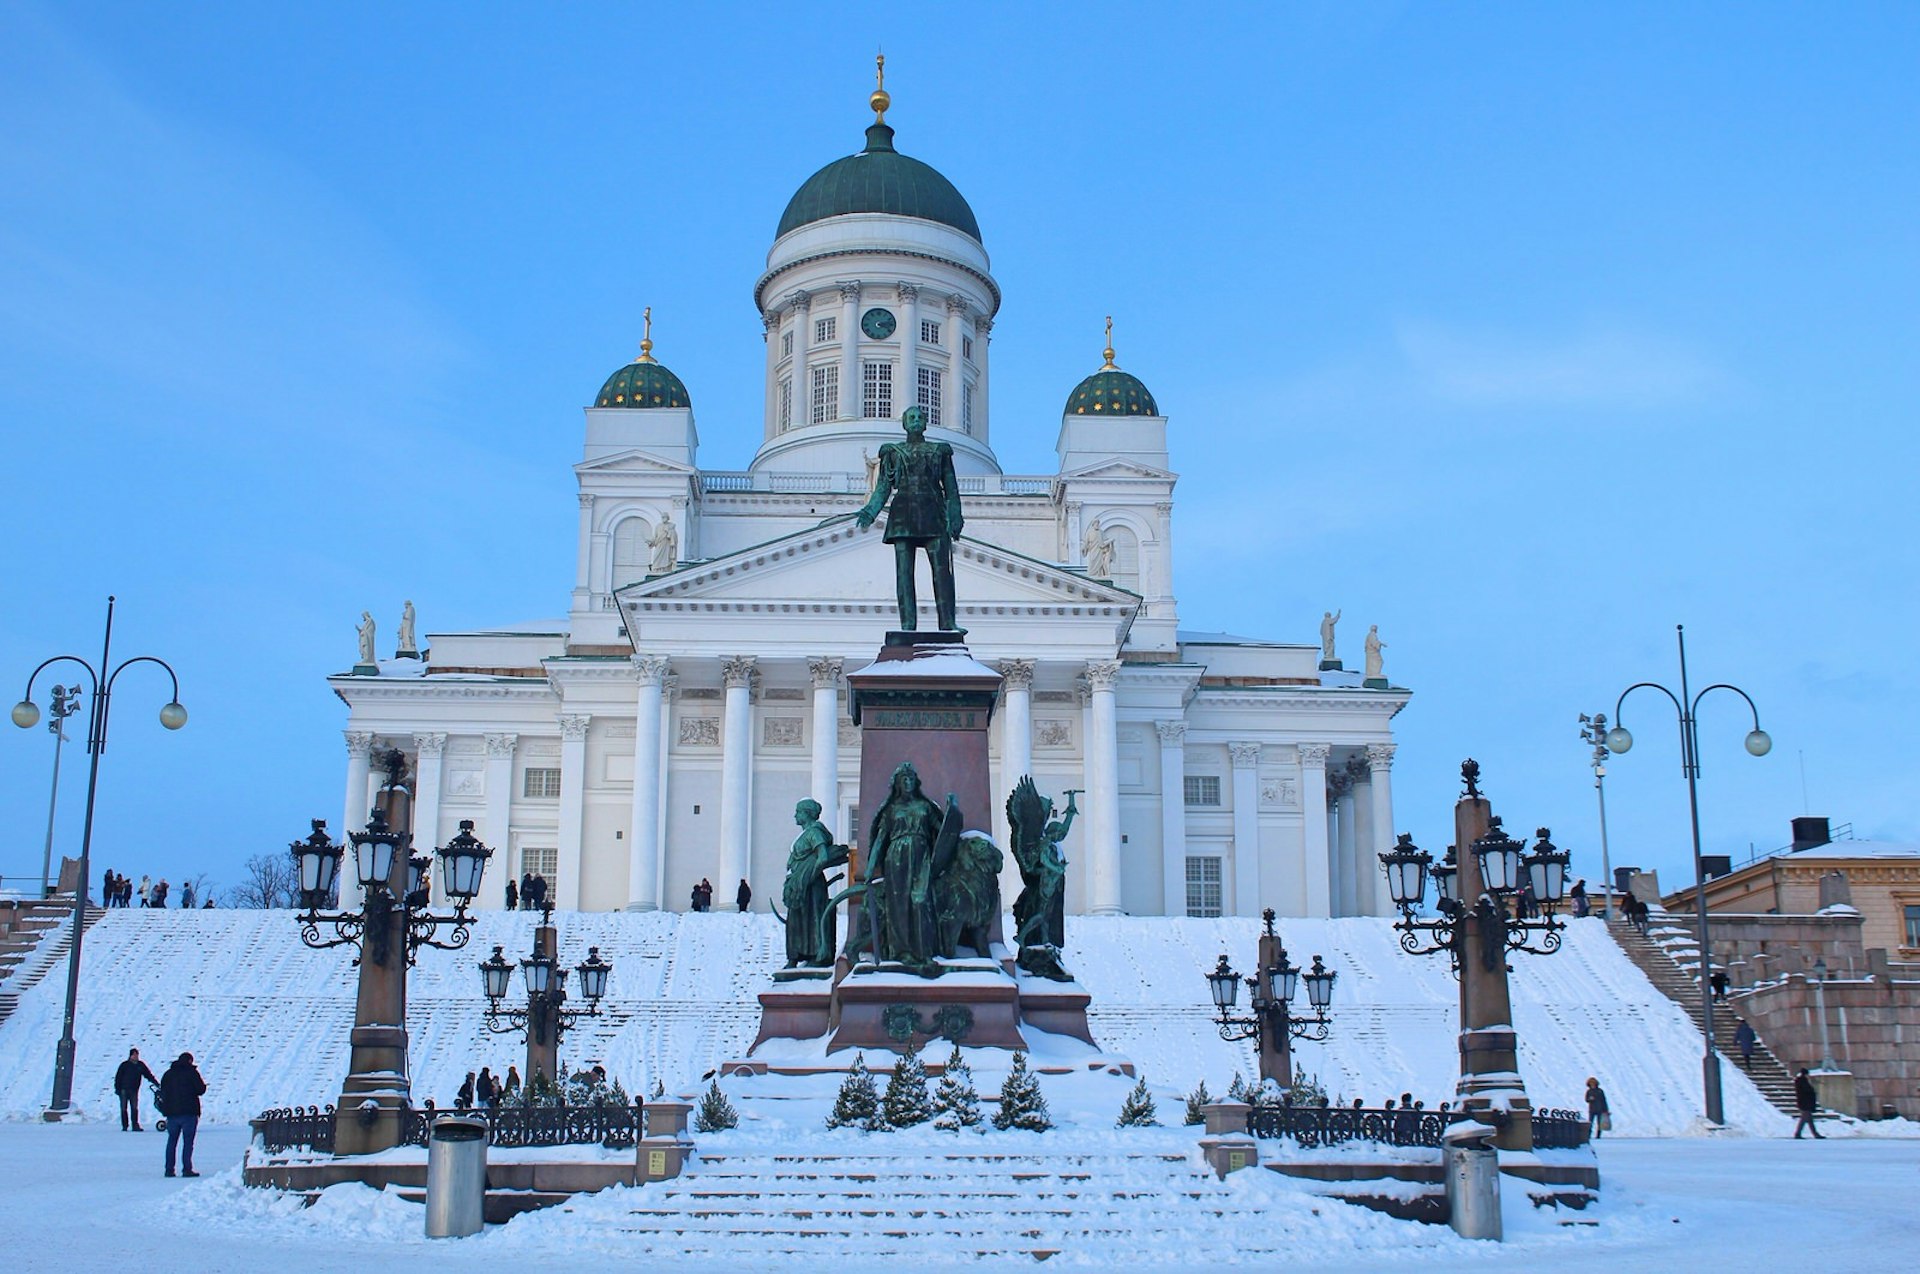 Snowy, twilight shot of Tuomiokirkko, Helsinki, with the statue of Tsar Alexander in the middle ground